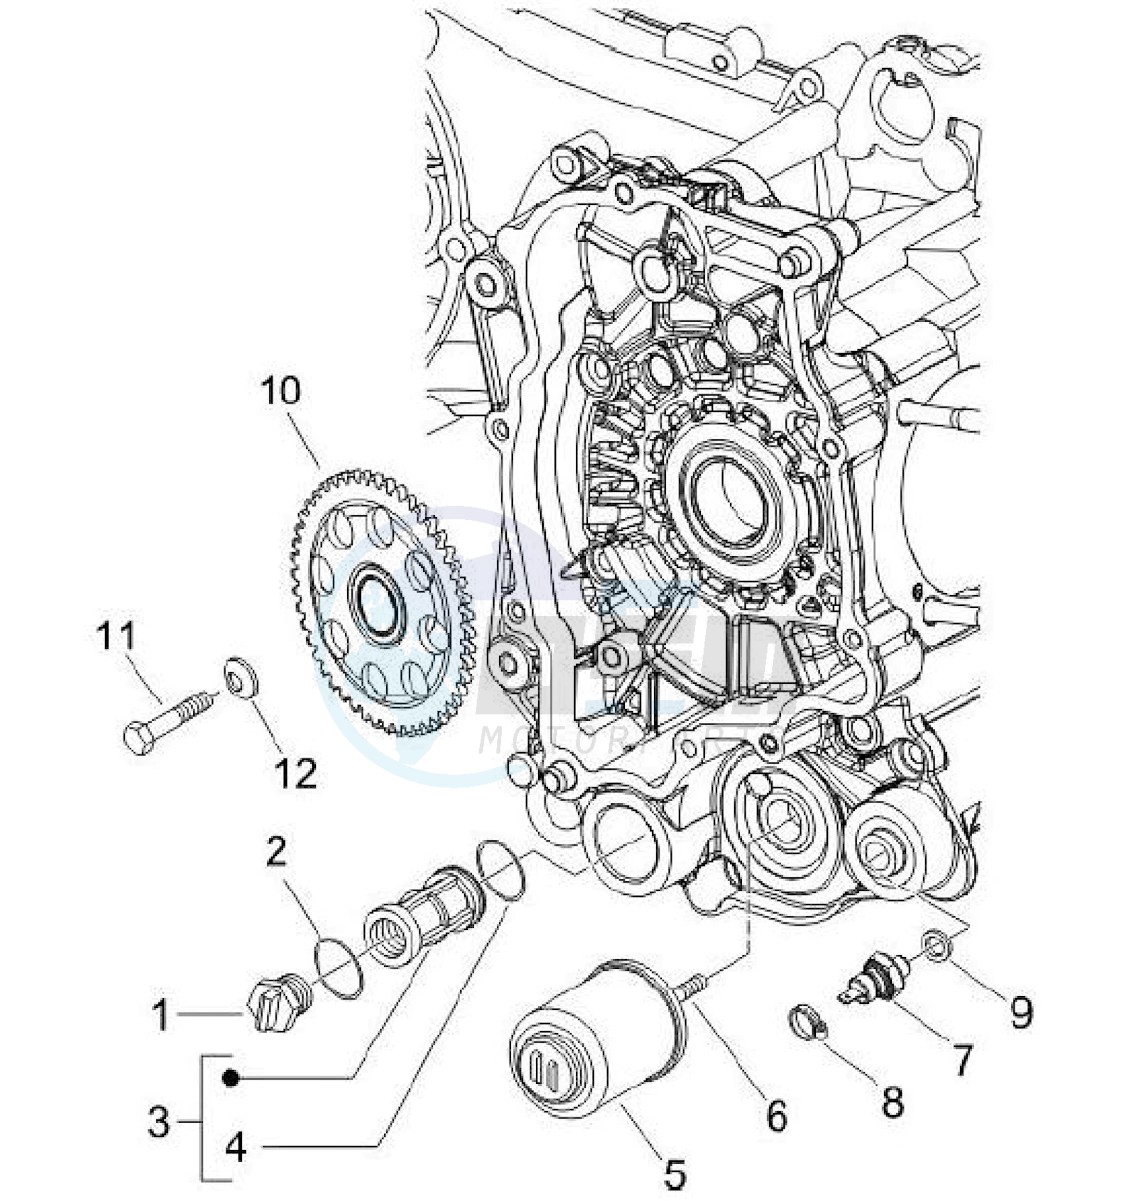 Oil filter (Positions) image